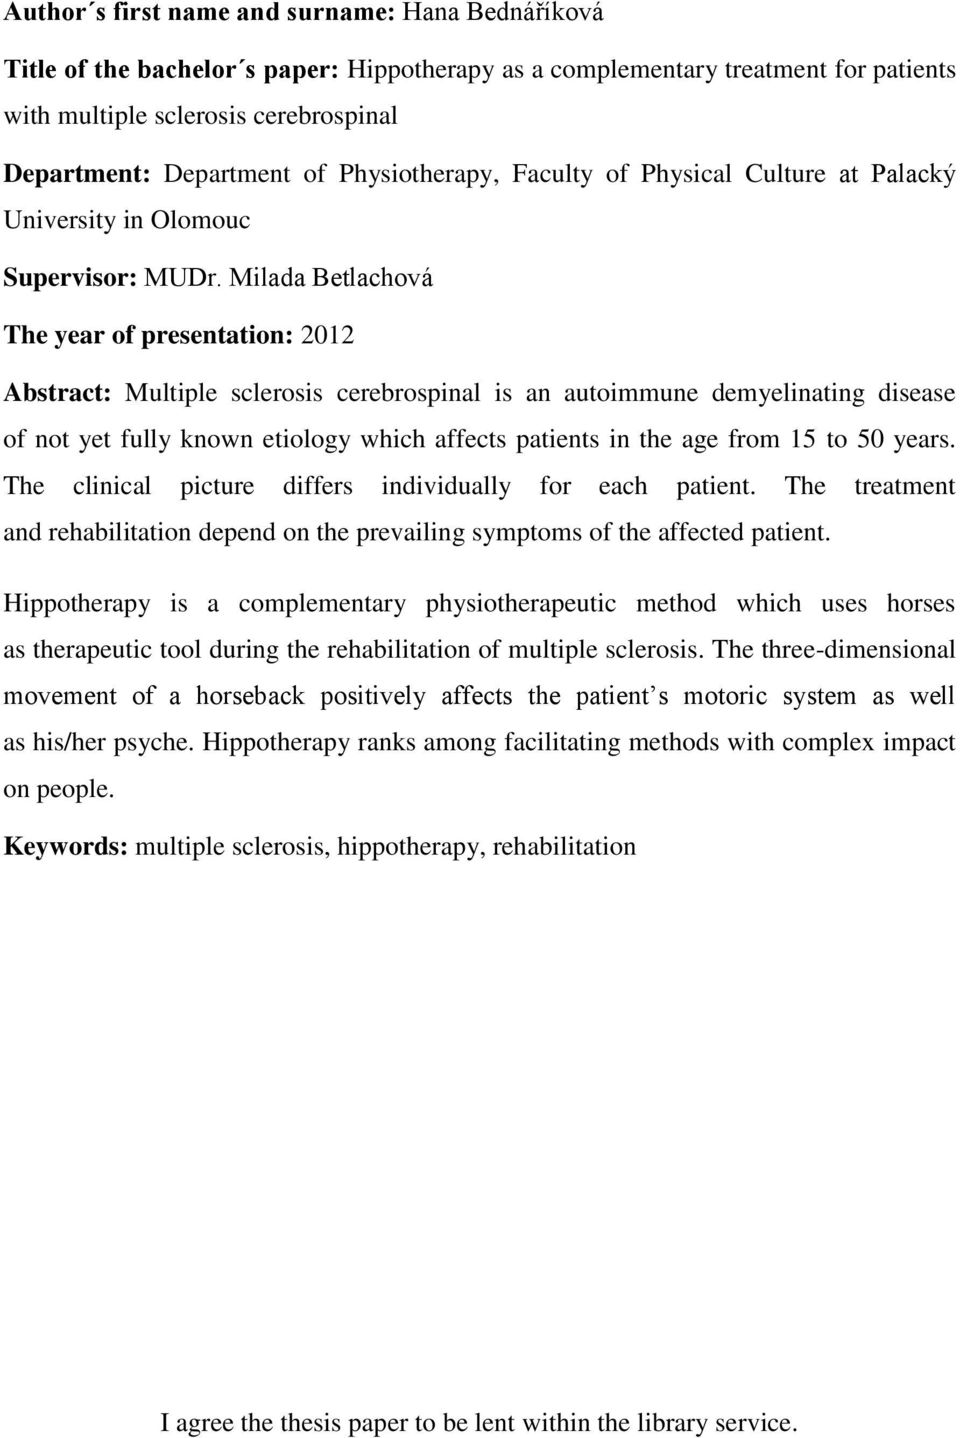 Milada Betlachová The year of presentation: 2012 Abstract: Multiple sclerosis cerebrospinal is an autoimmune demyelinating disease of not yet fully known etiology which affects patients in the age